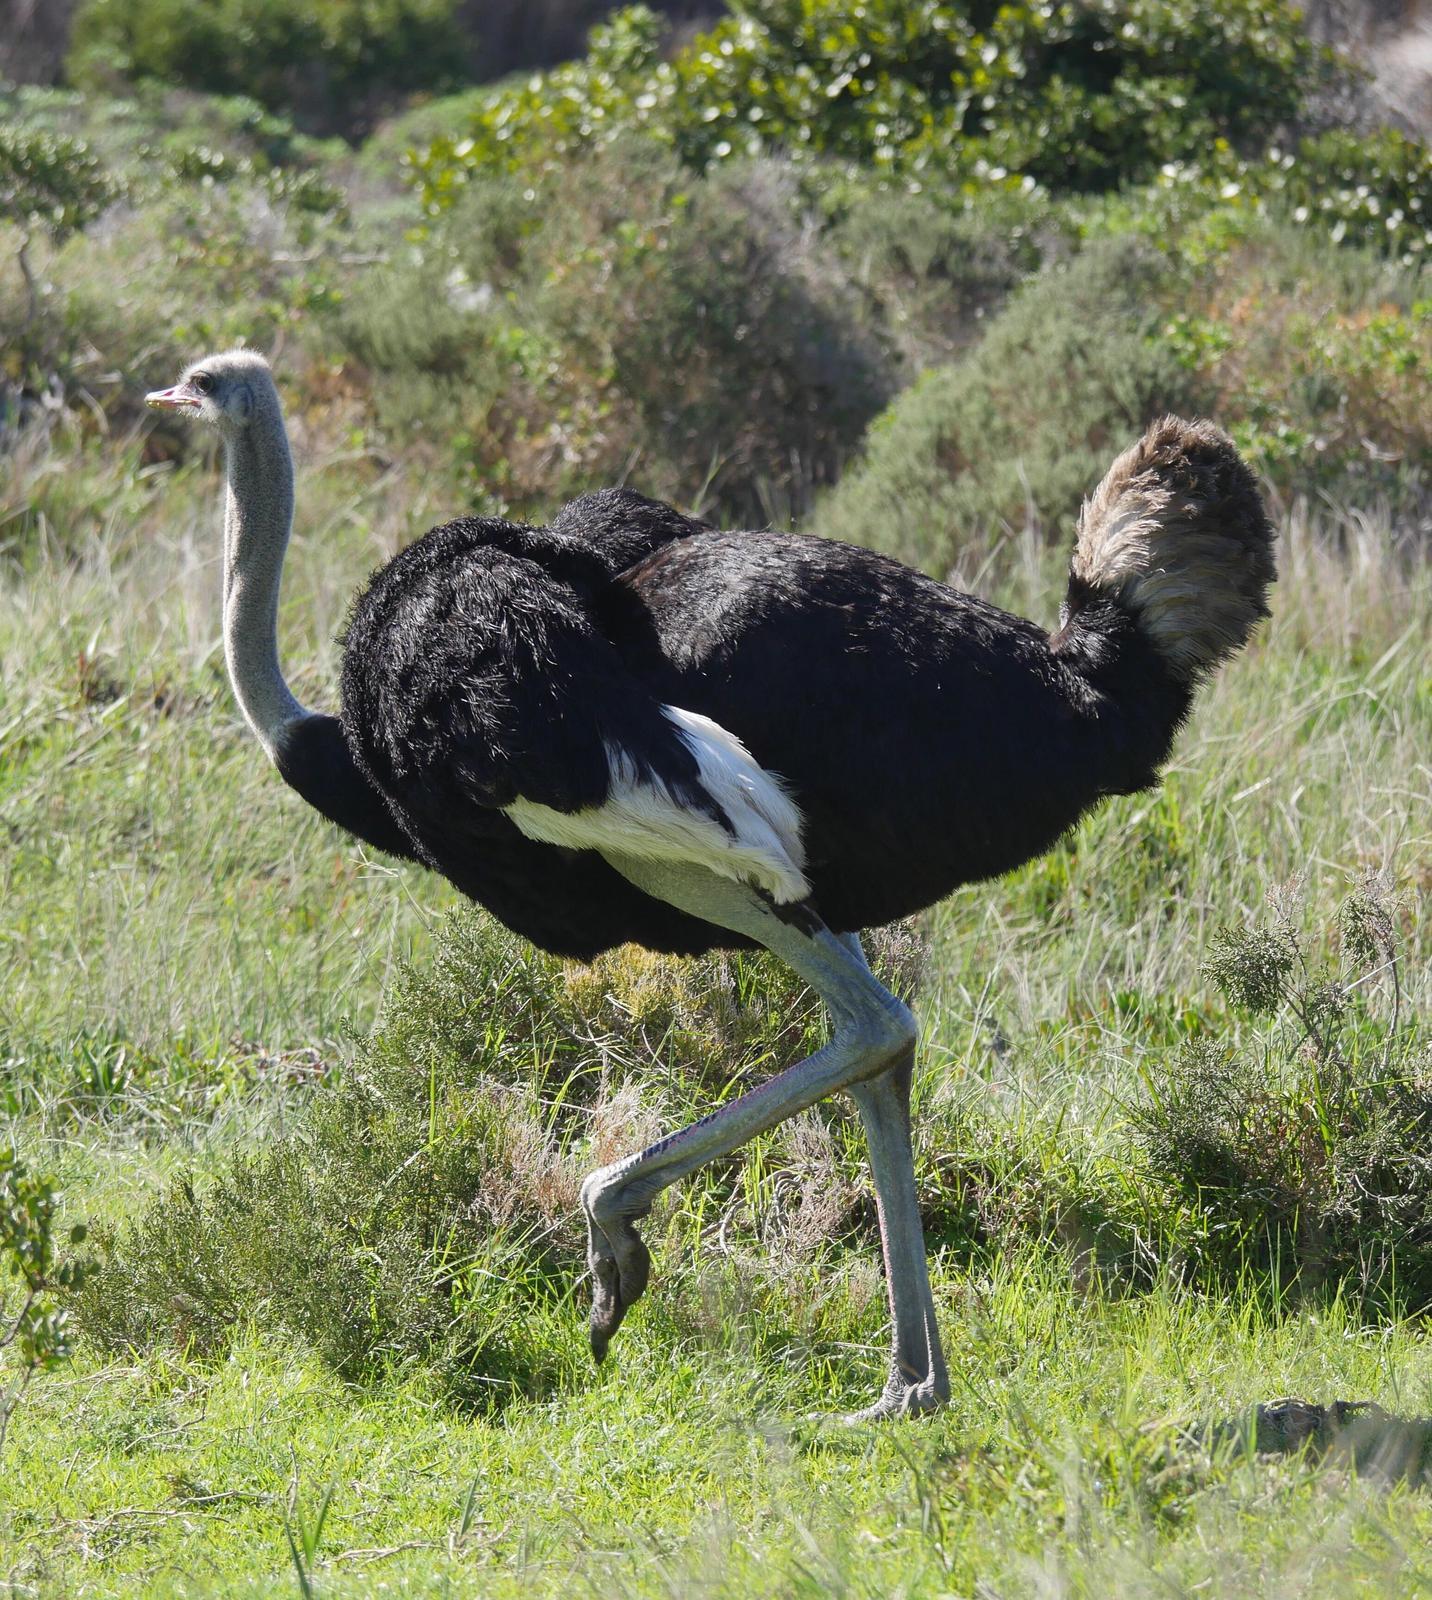 Common Ostrich Photo by Peter Lowe